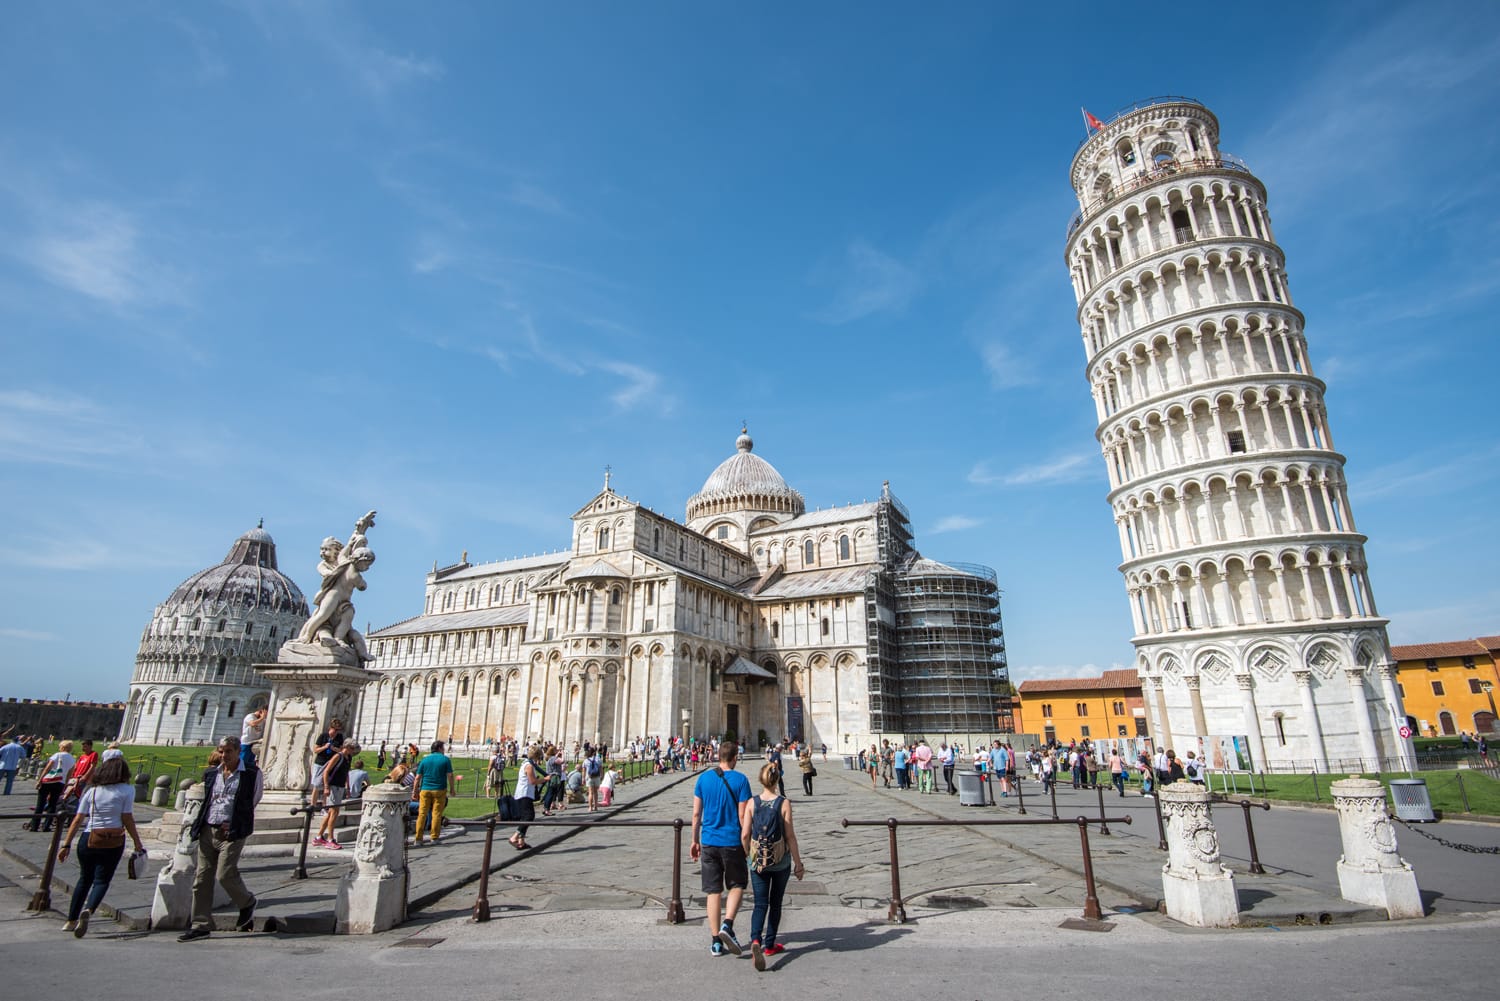 Piazza dei Miracoli complex with the leaning tower of Pisa in front, Italy